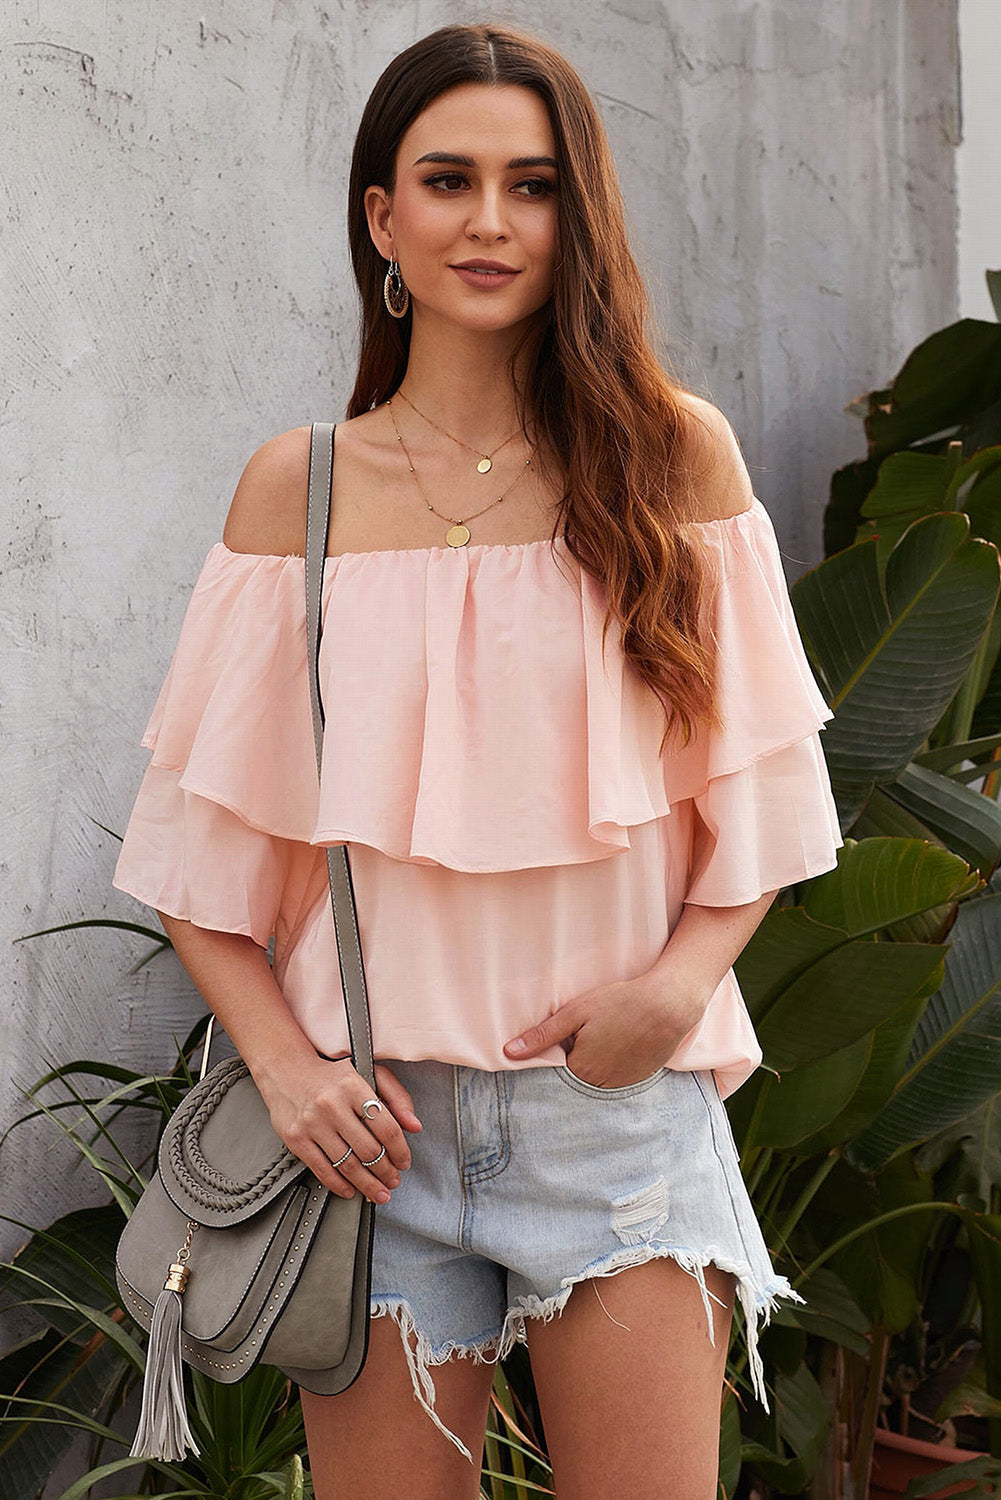 Women Summer Sexy Off Shoulder Blouses Ruffles Short Sleeves Tee Tops Casual Solid Color T-Shirts Sai Feel